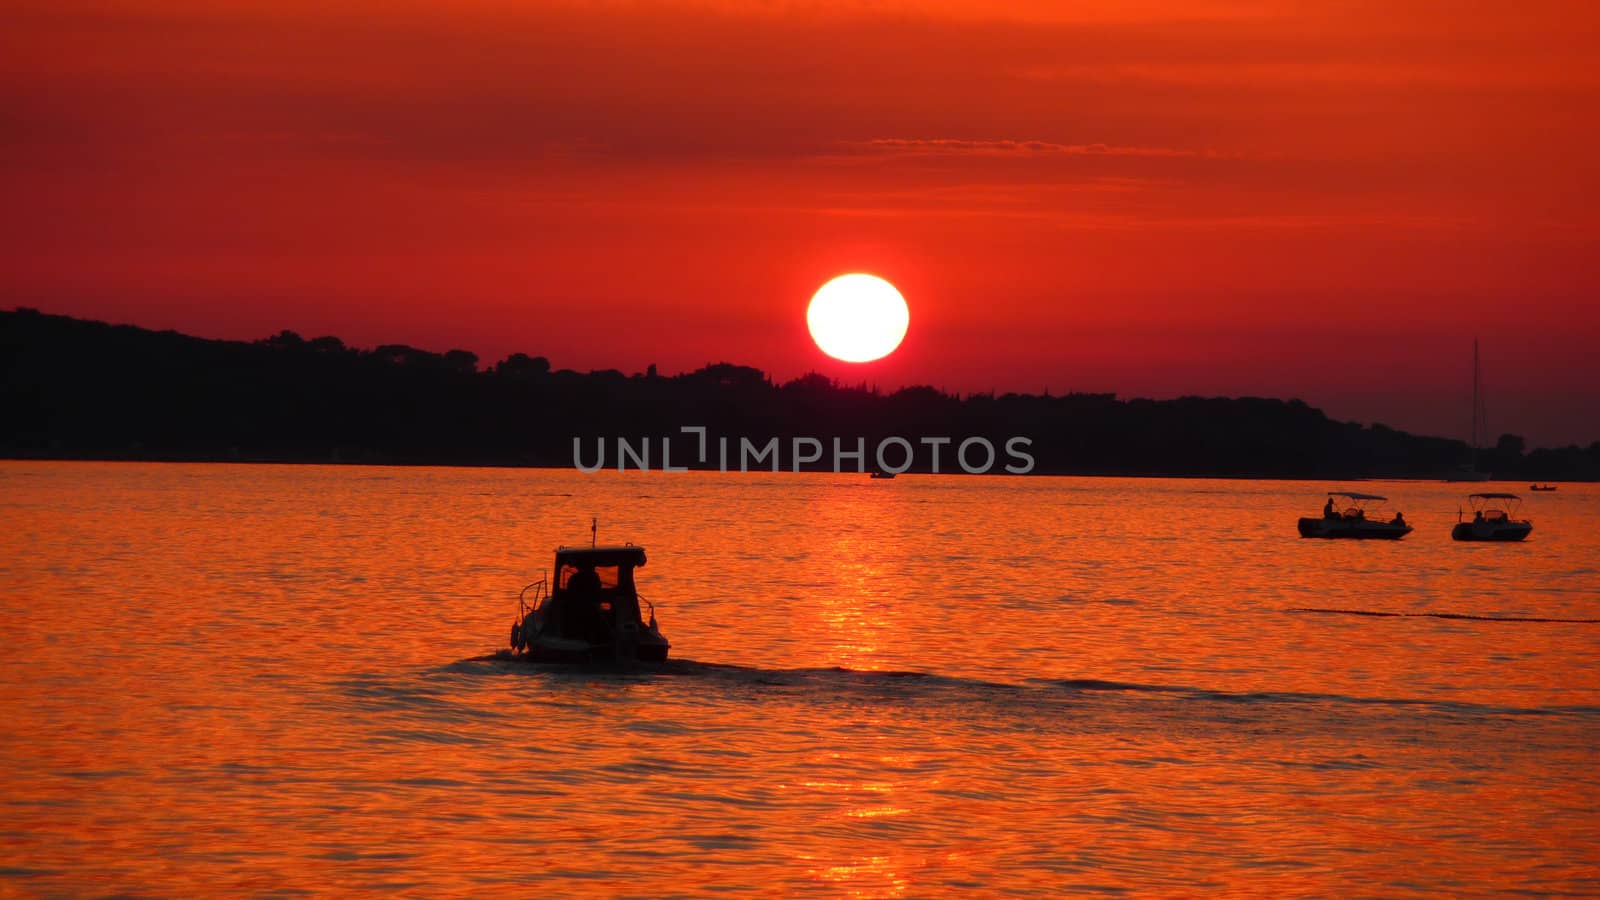 Fishermen on sea at red sunset by xbrchx